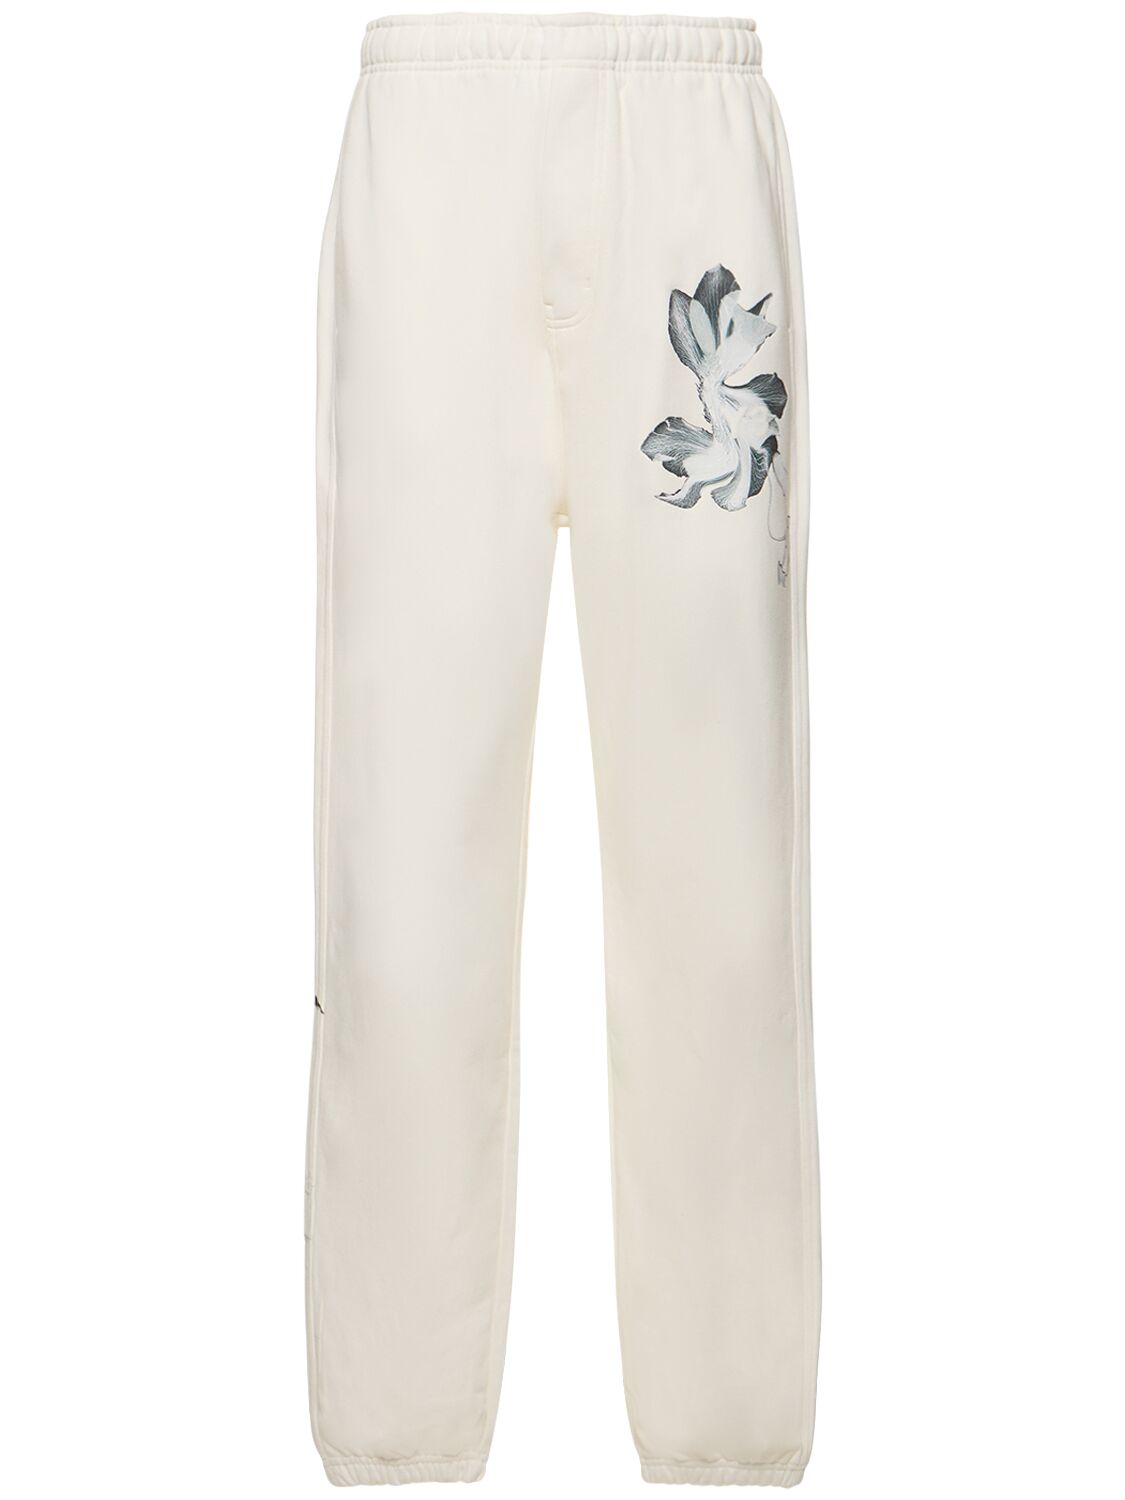 Image of Gfx French Terry Pants